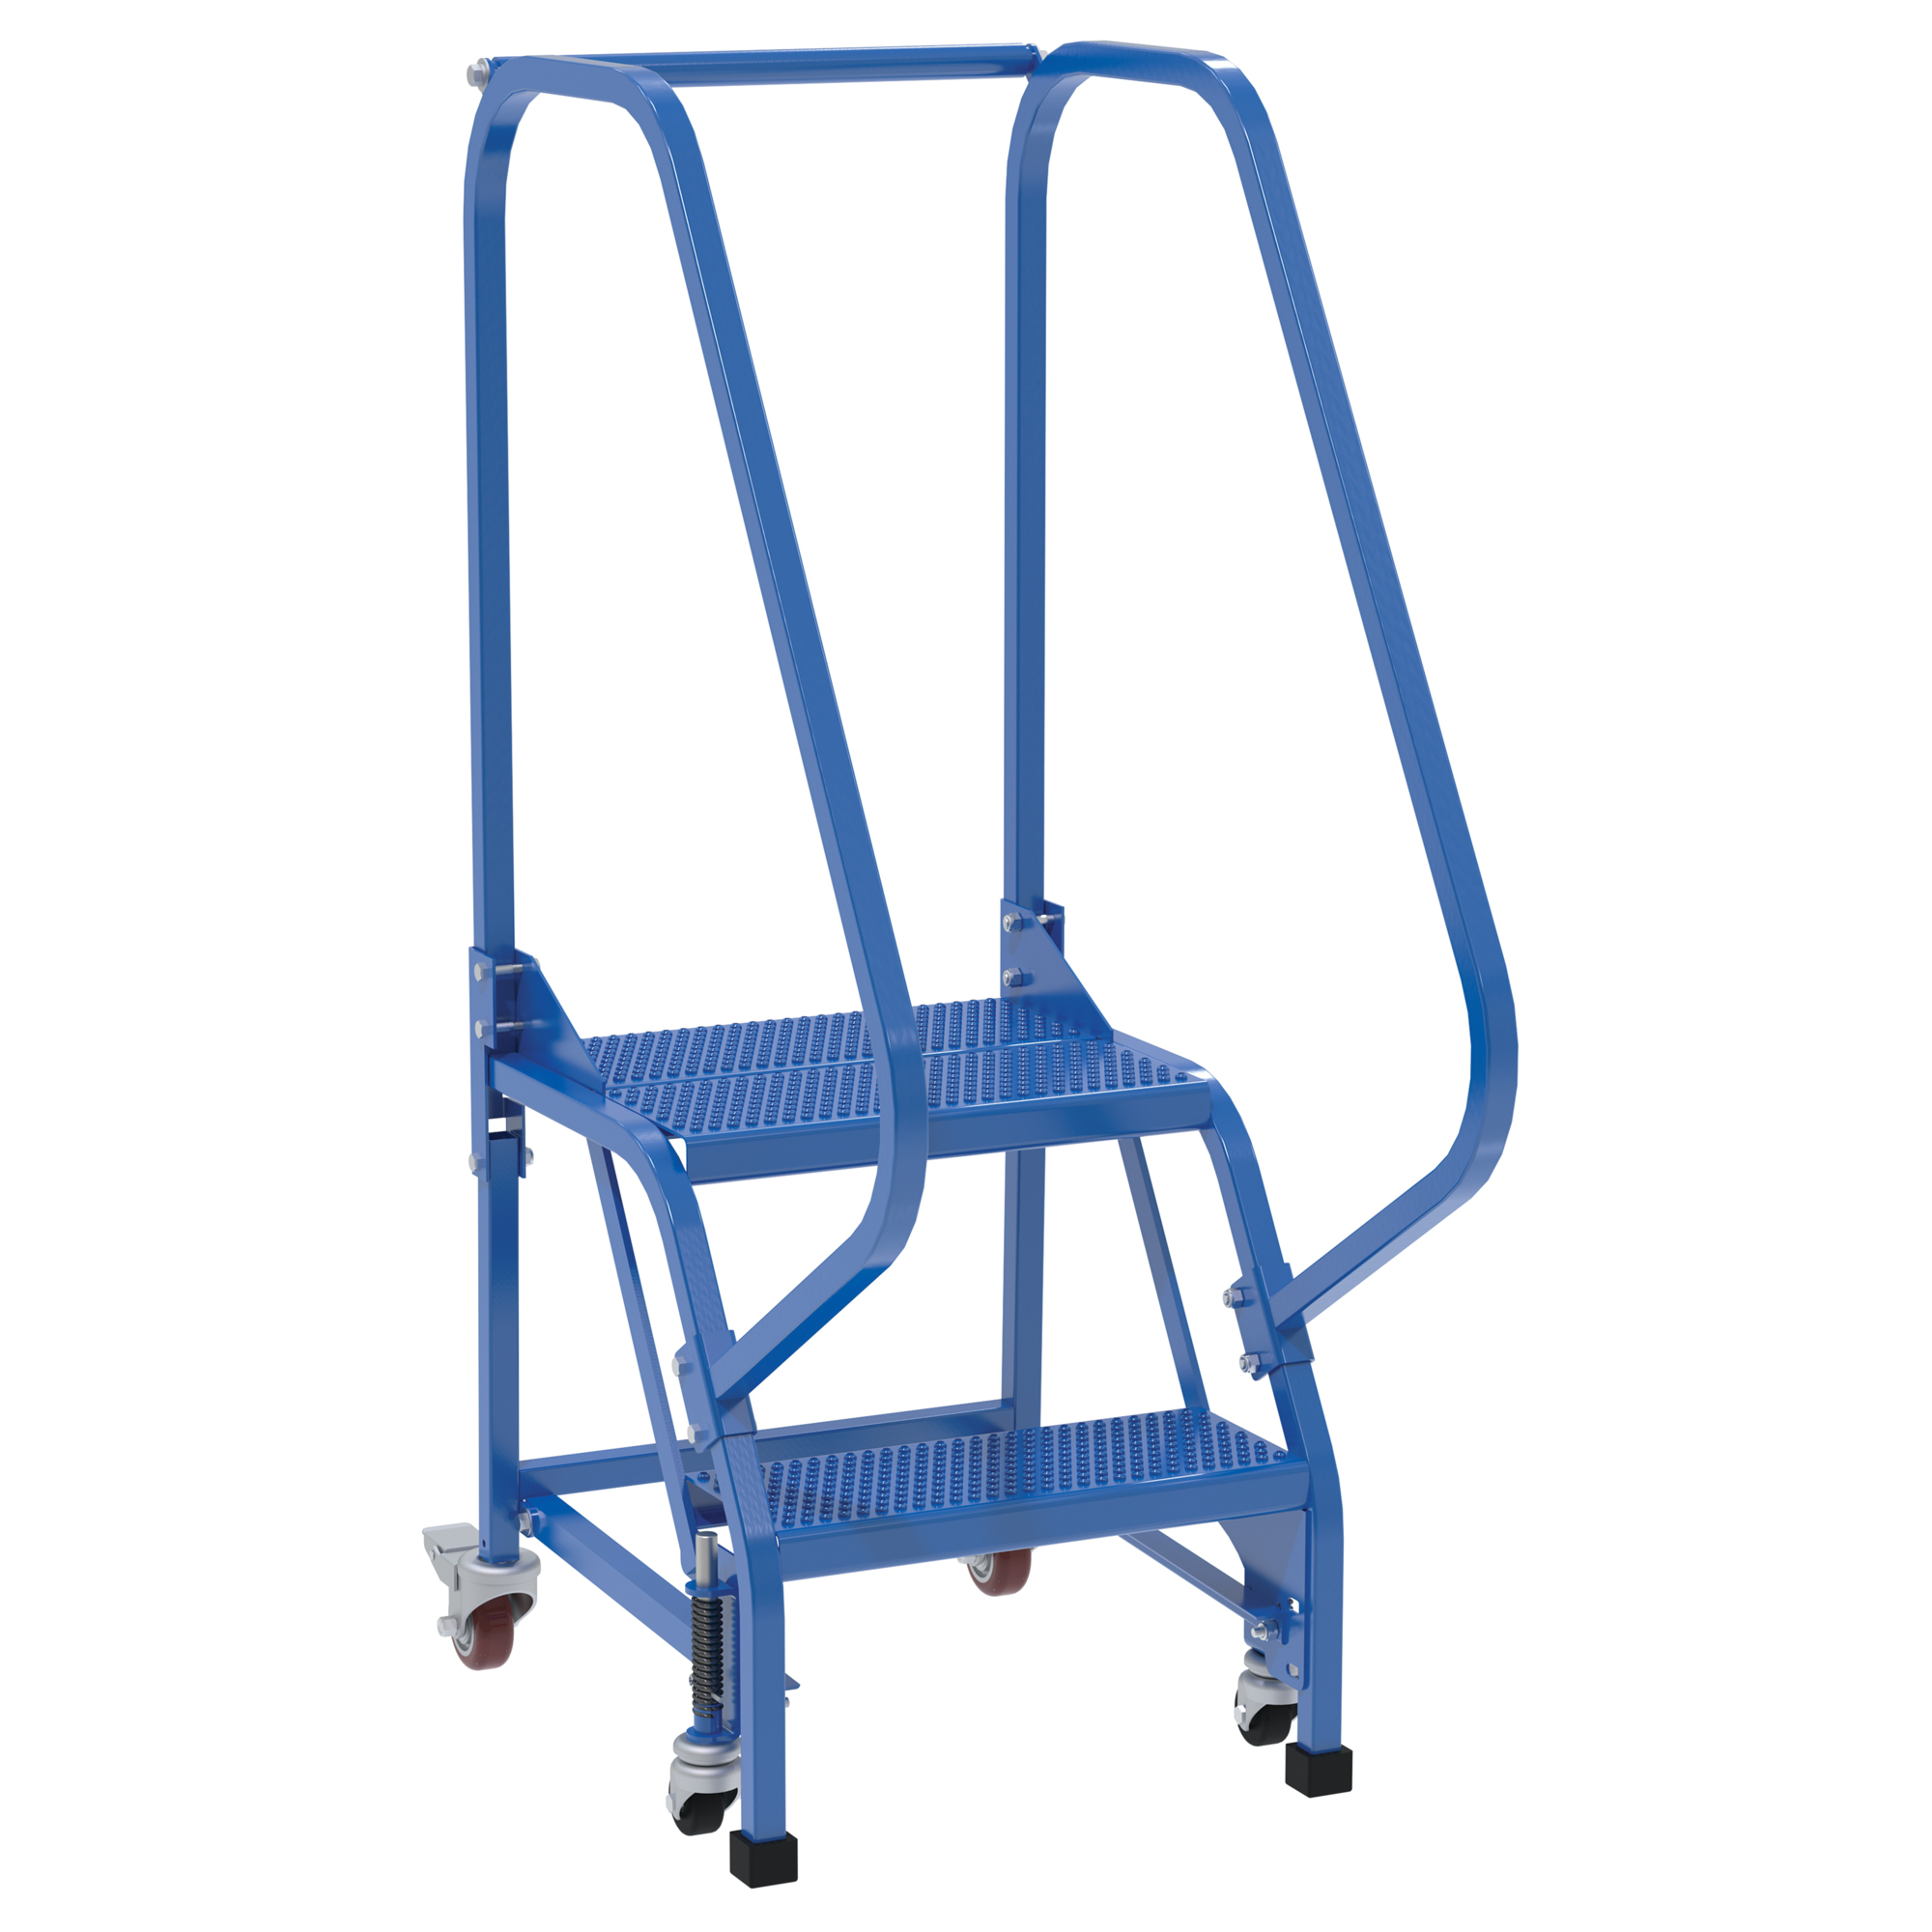 Vestil, 2 Step perforated warehouse ladder, Overall Height 50 in, Steps 2 Material Steel, Model LAD-PW-18-2-P